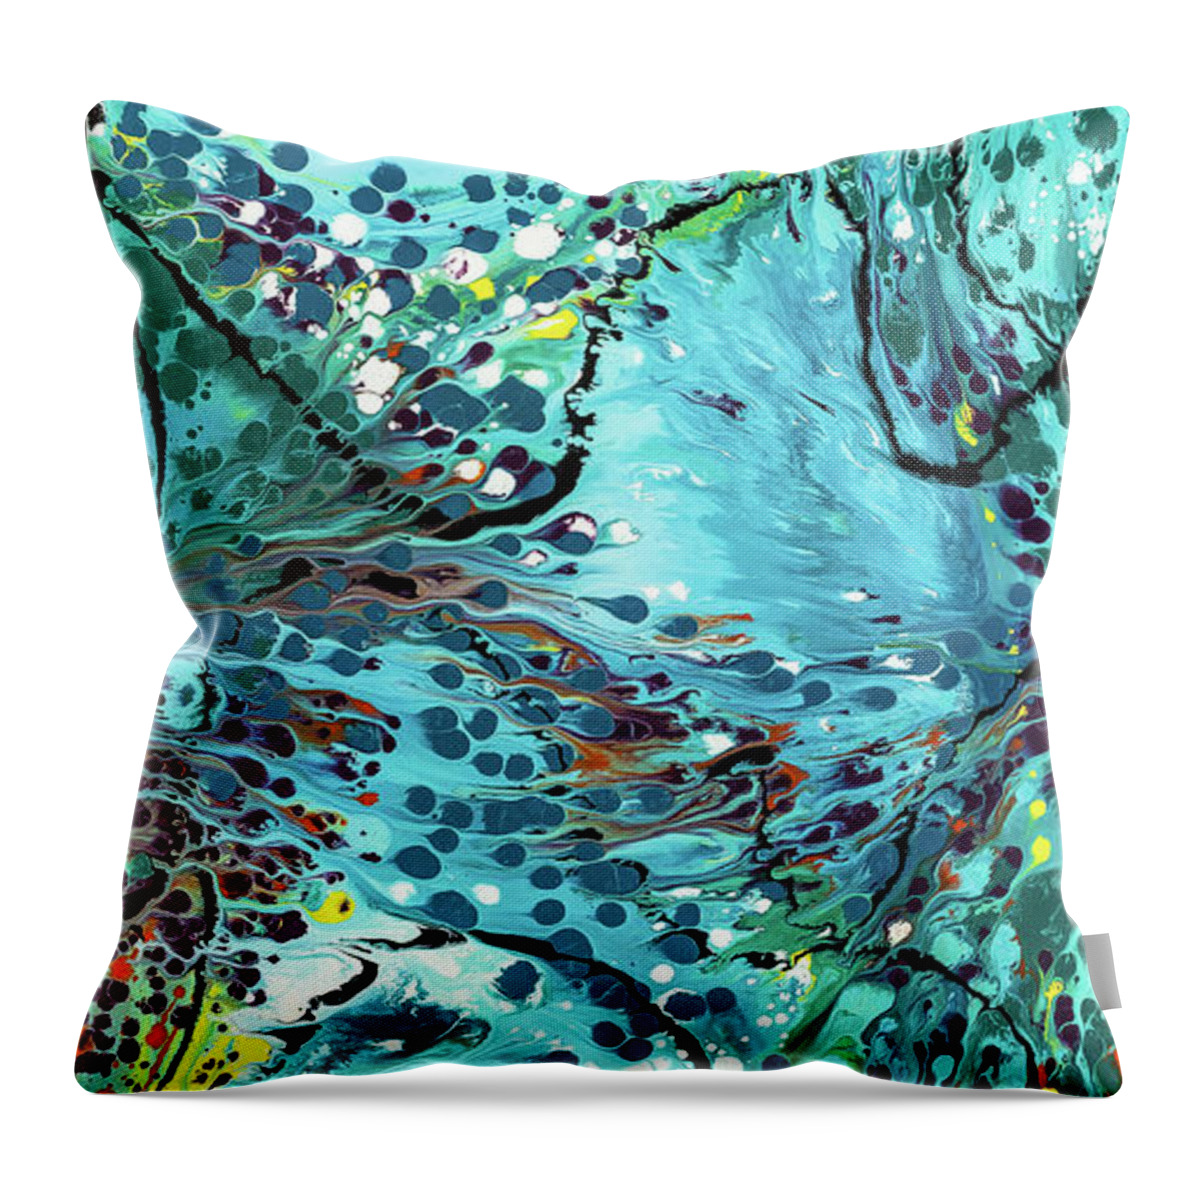 Abstract Art Print Throw Pillow featuring the painting Messy Decision by Dianne Bartlett